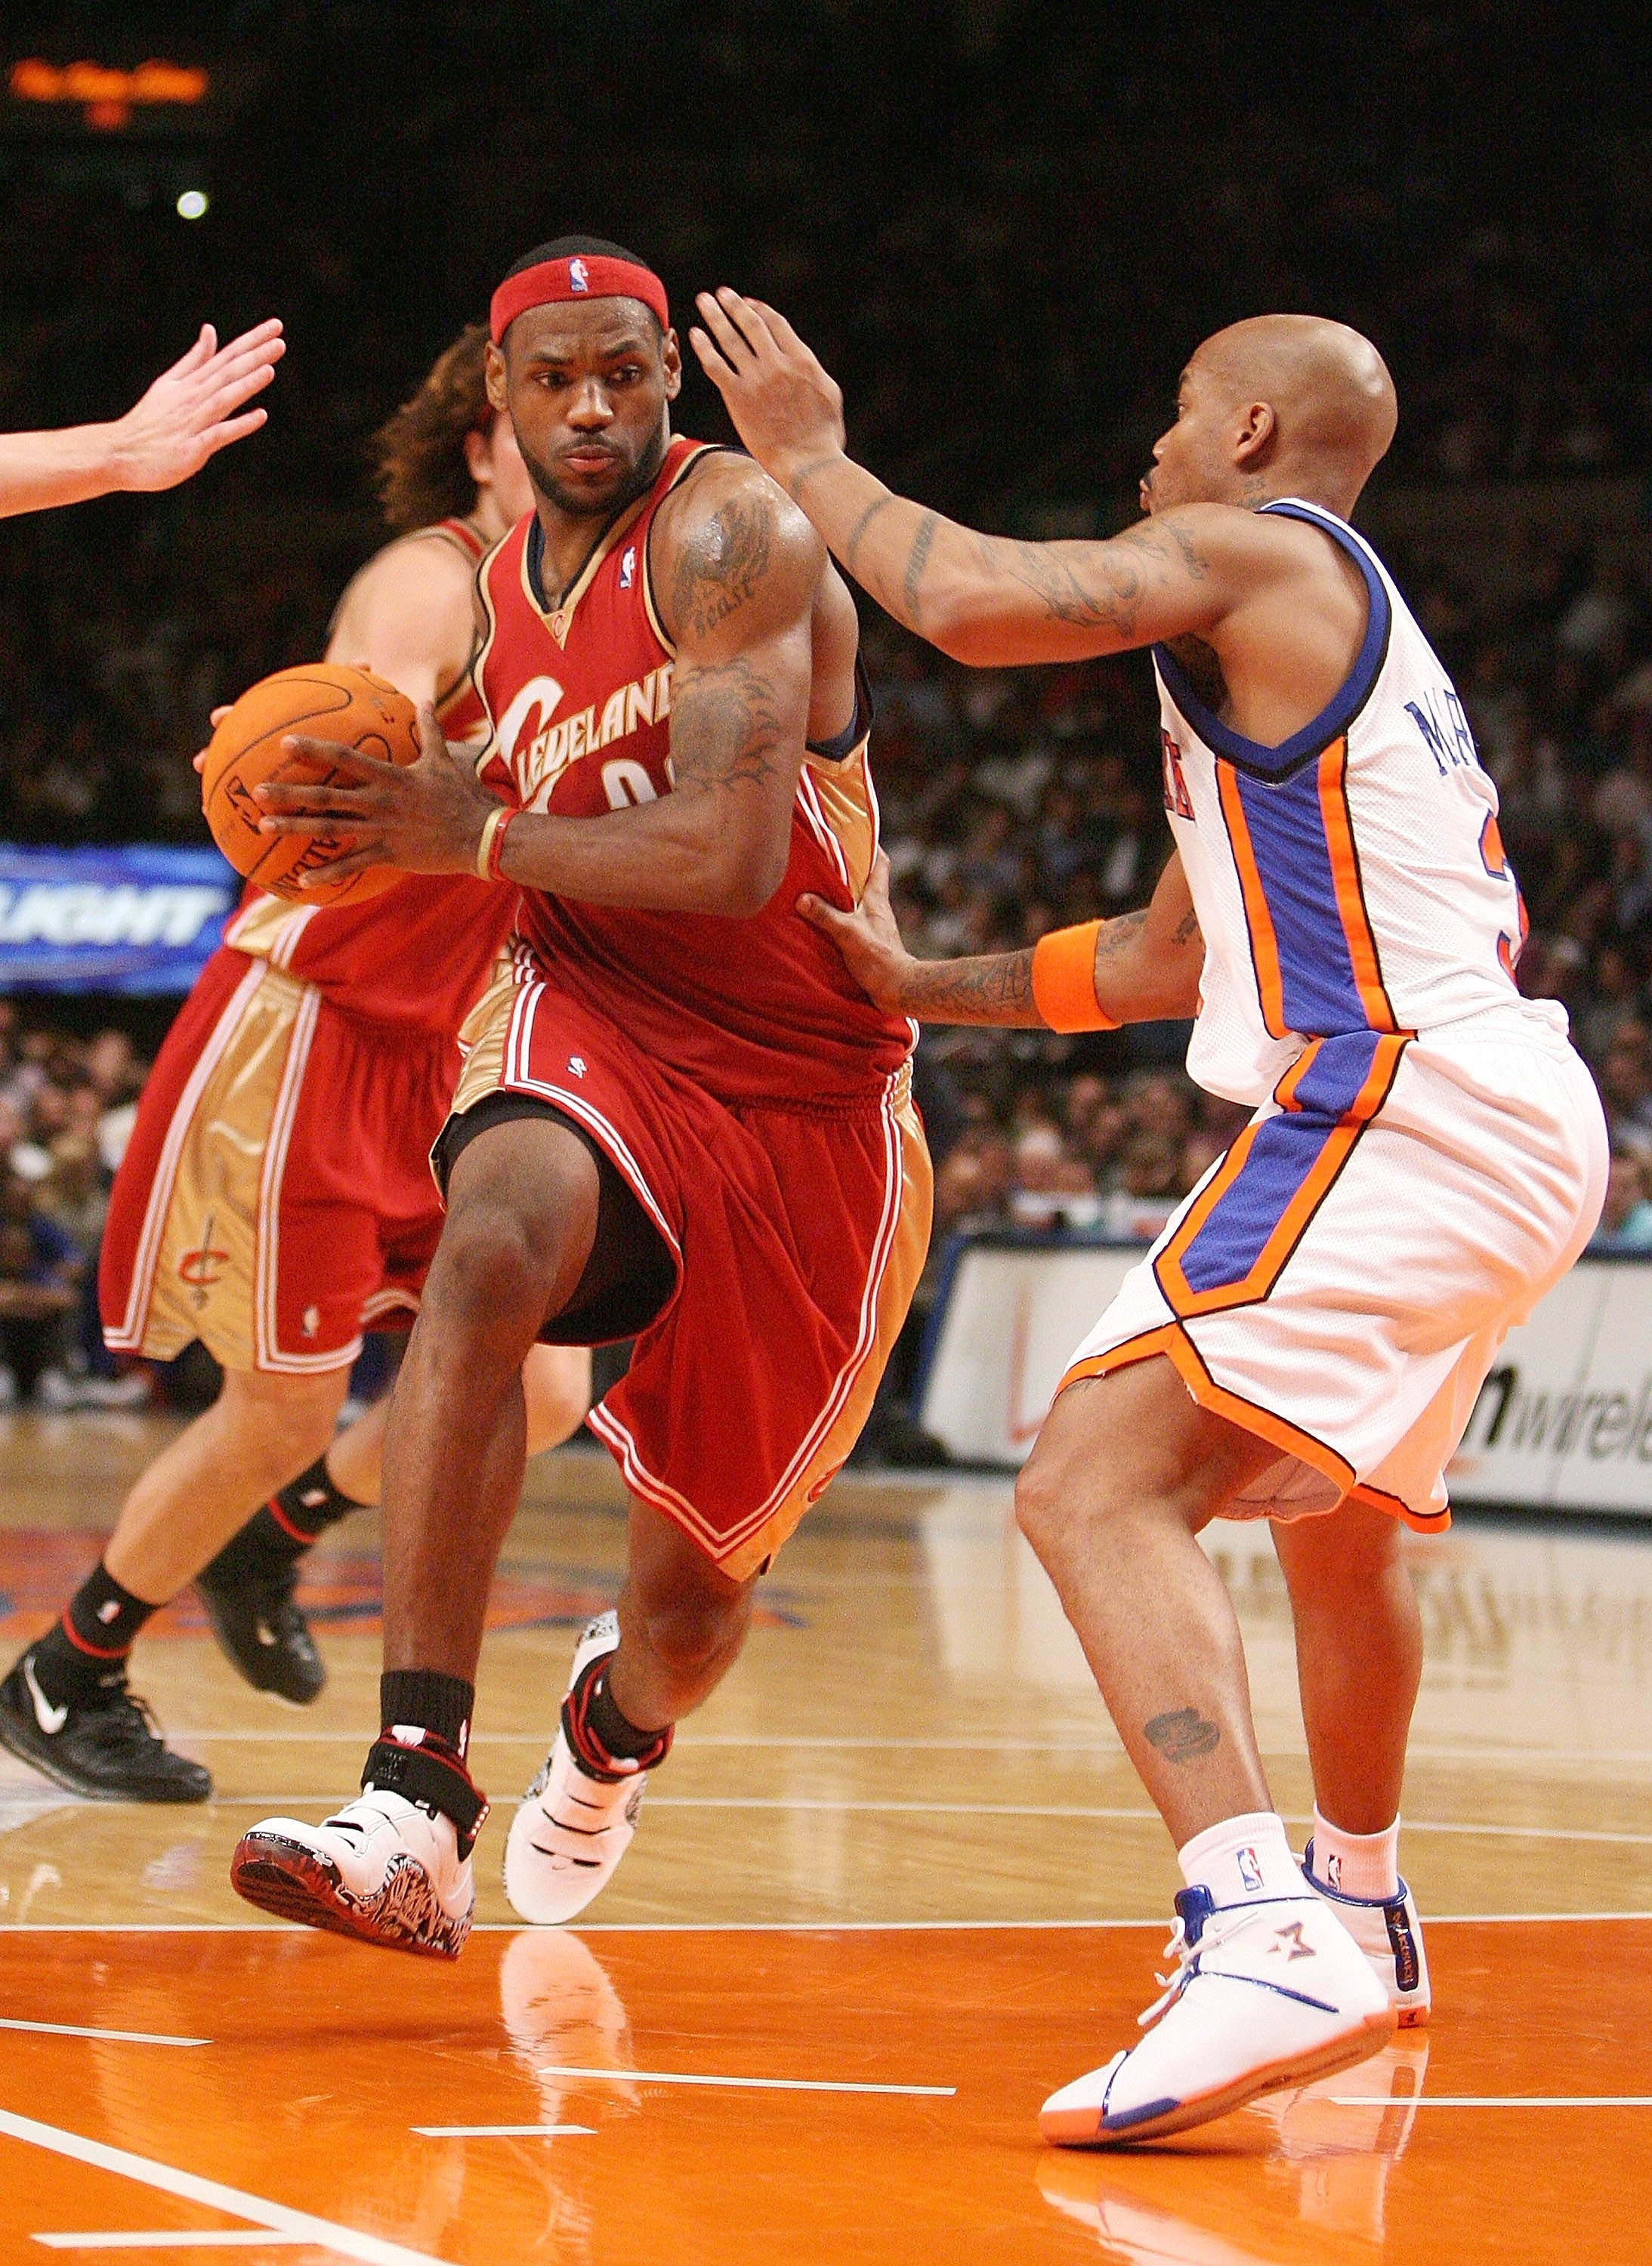 NEW YORK - NOVEMBER 13:  LeBron James #23 of the Cleveland Cavaliers charges past Stephon Marbury #3 of the New York Knicks on November 13, 2006 at Madison Square Garden in New York City.  NOTE TO USER: User expressly acknowledges and agrees that, by down